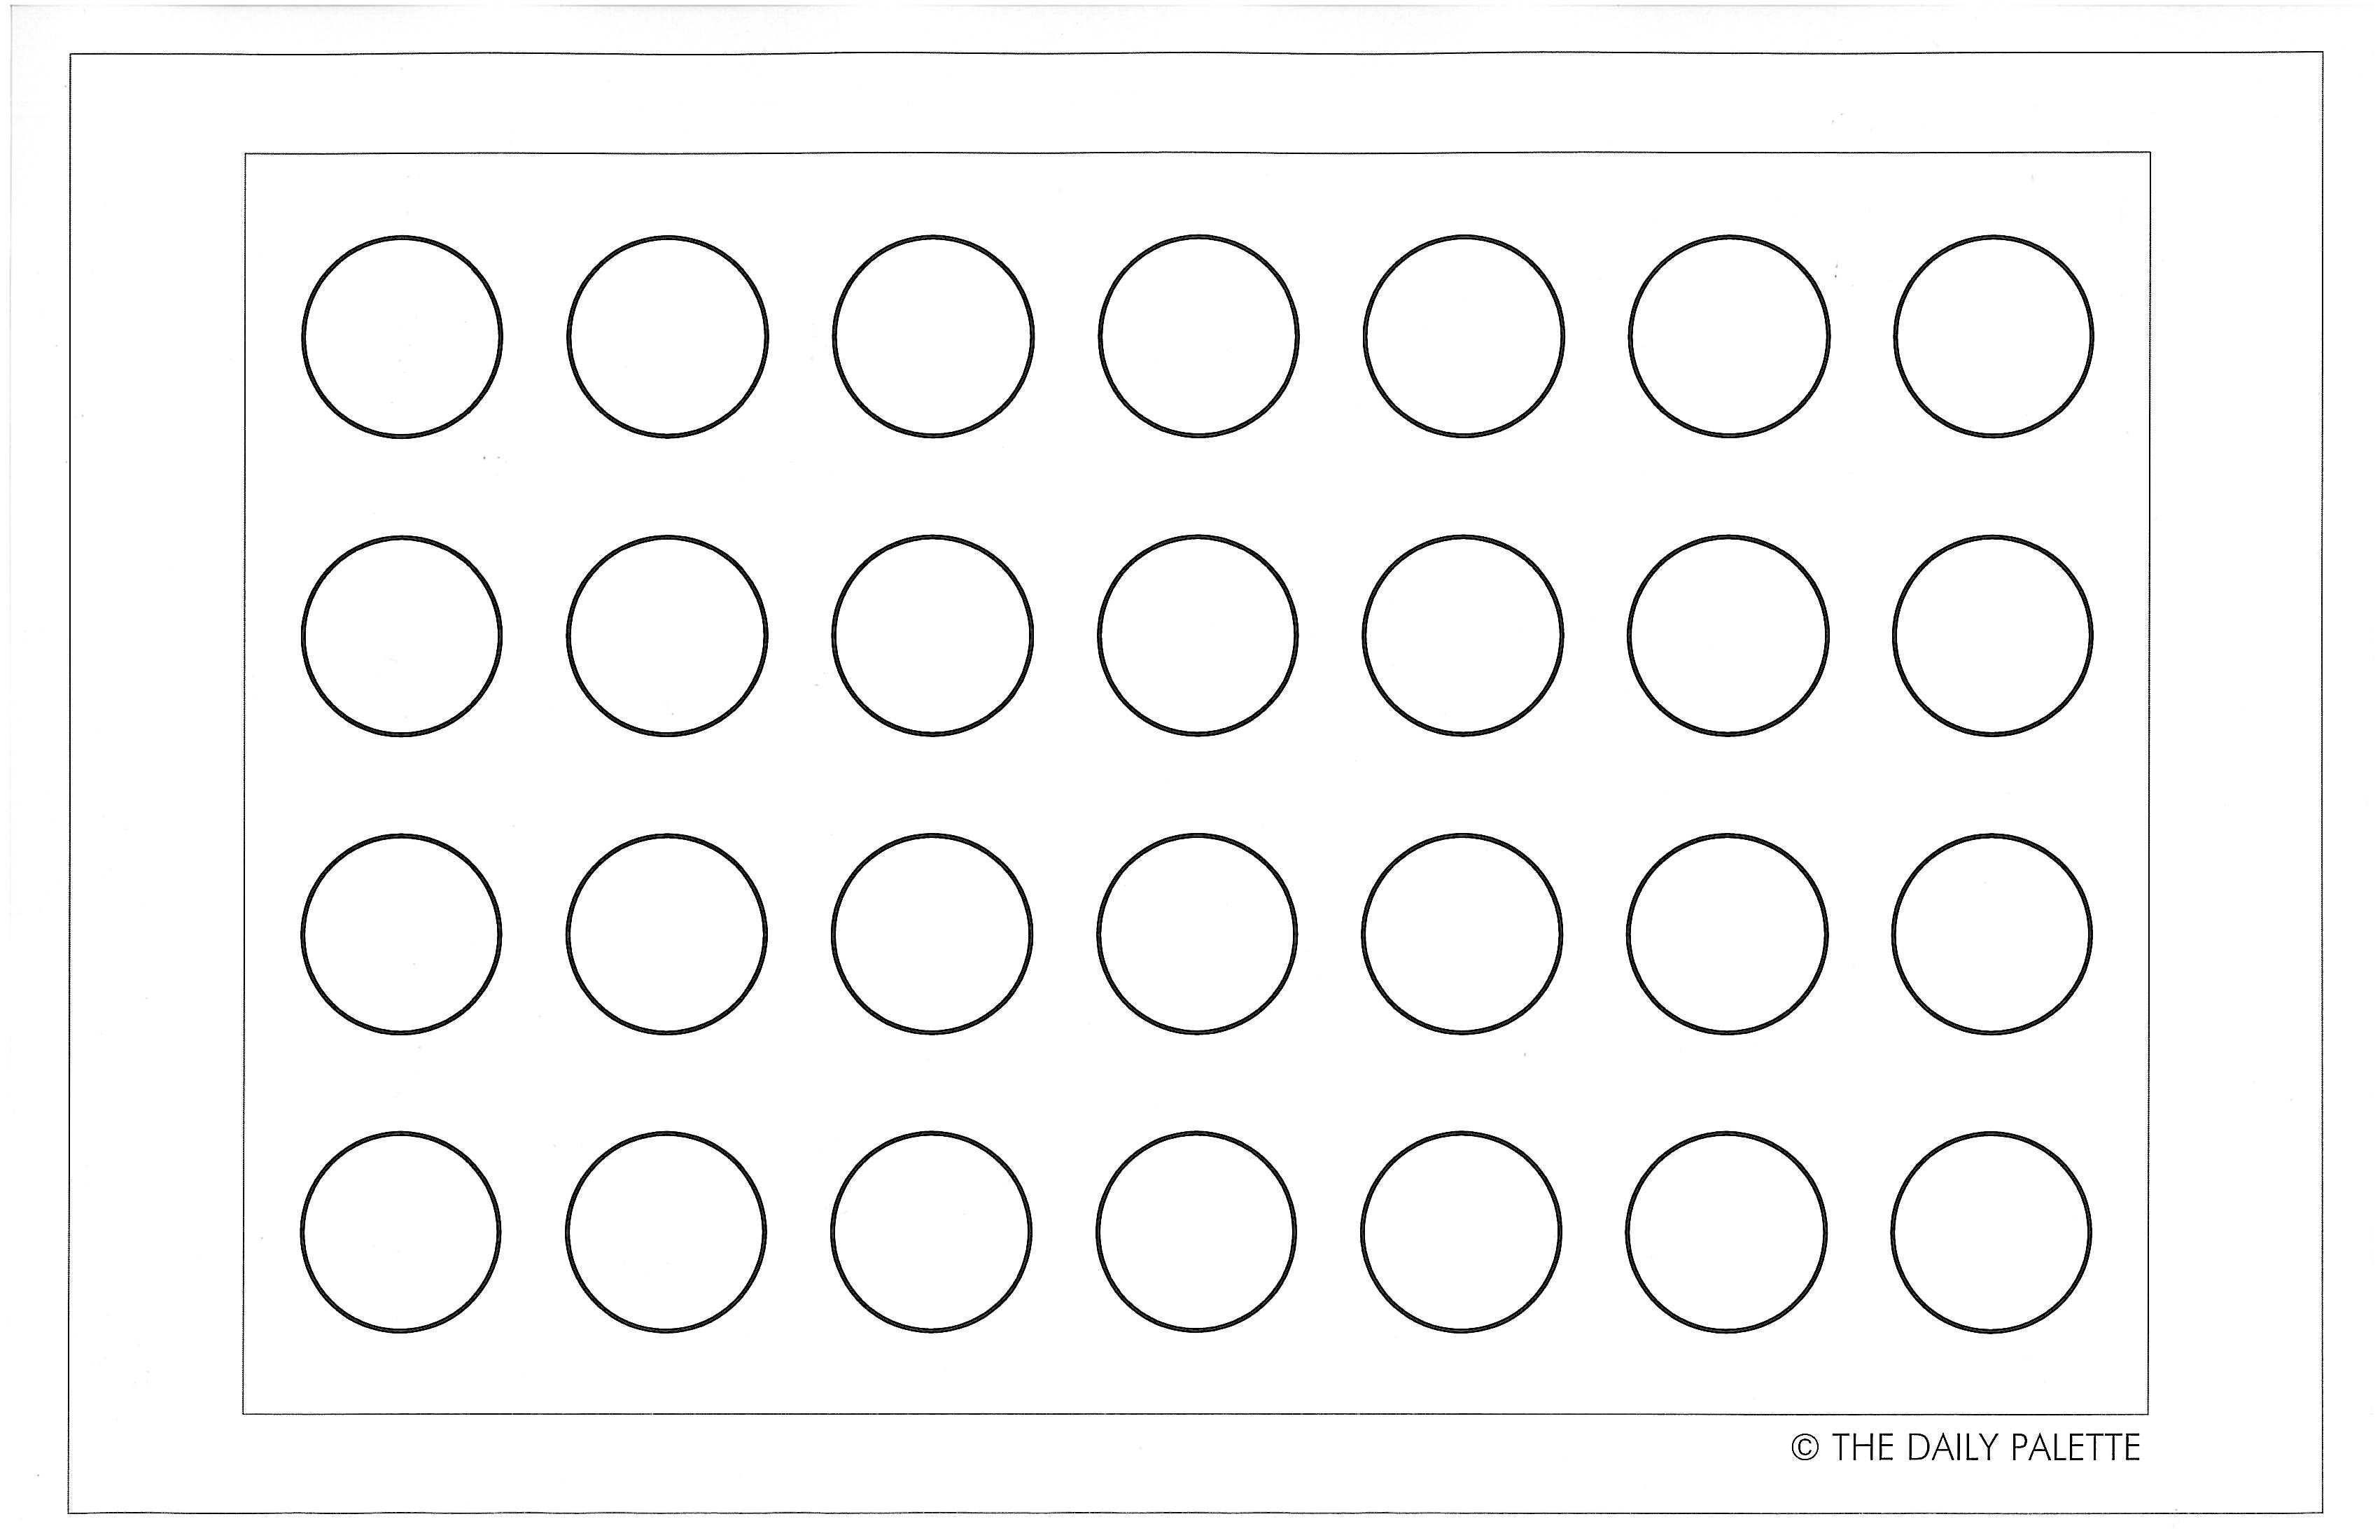 Macaron templates to print off maybe I can toss my tired